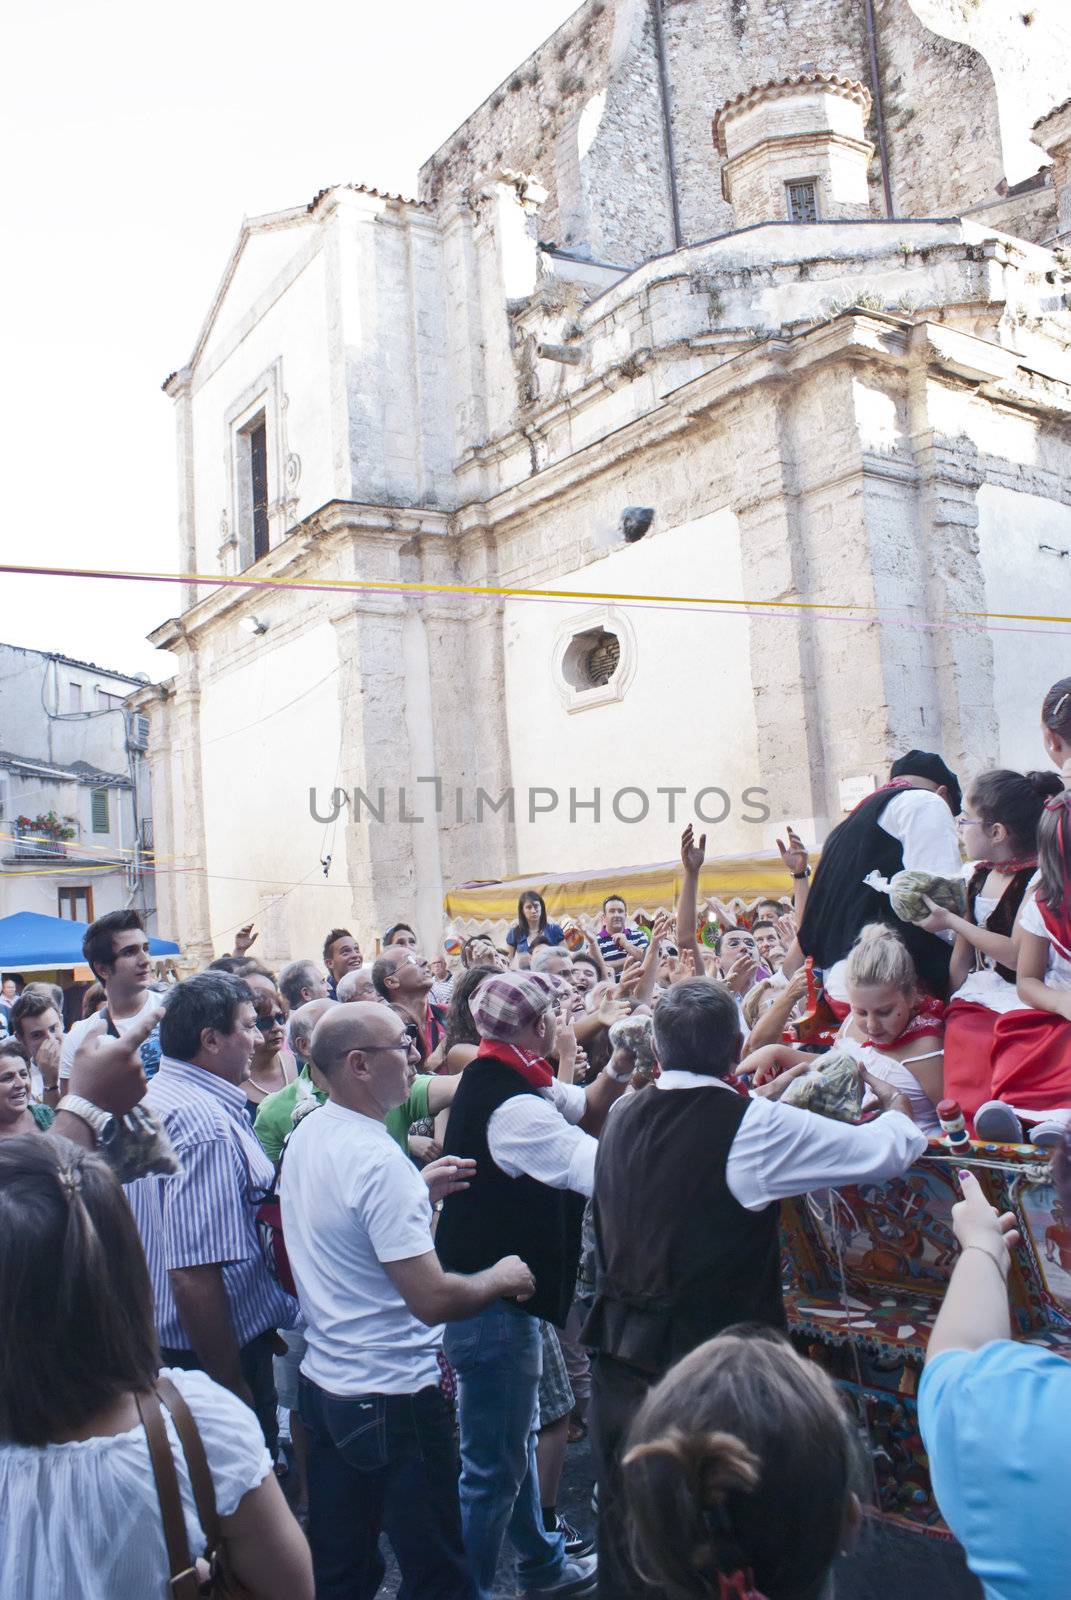 POLIZZI GENEROSA, SICILY - AUGUST 21: Sicilian cart delivers the nuts to tourists at the International "Festival of hazelnuts",parade through the city: August 21, 2011 in Polizzi Generosa,Sicily,Italy